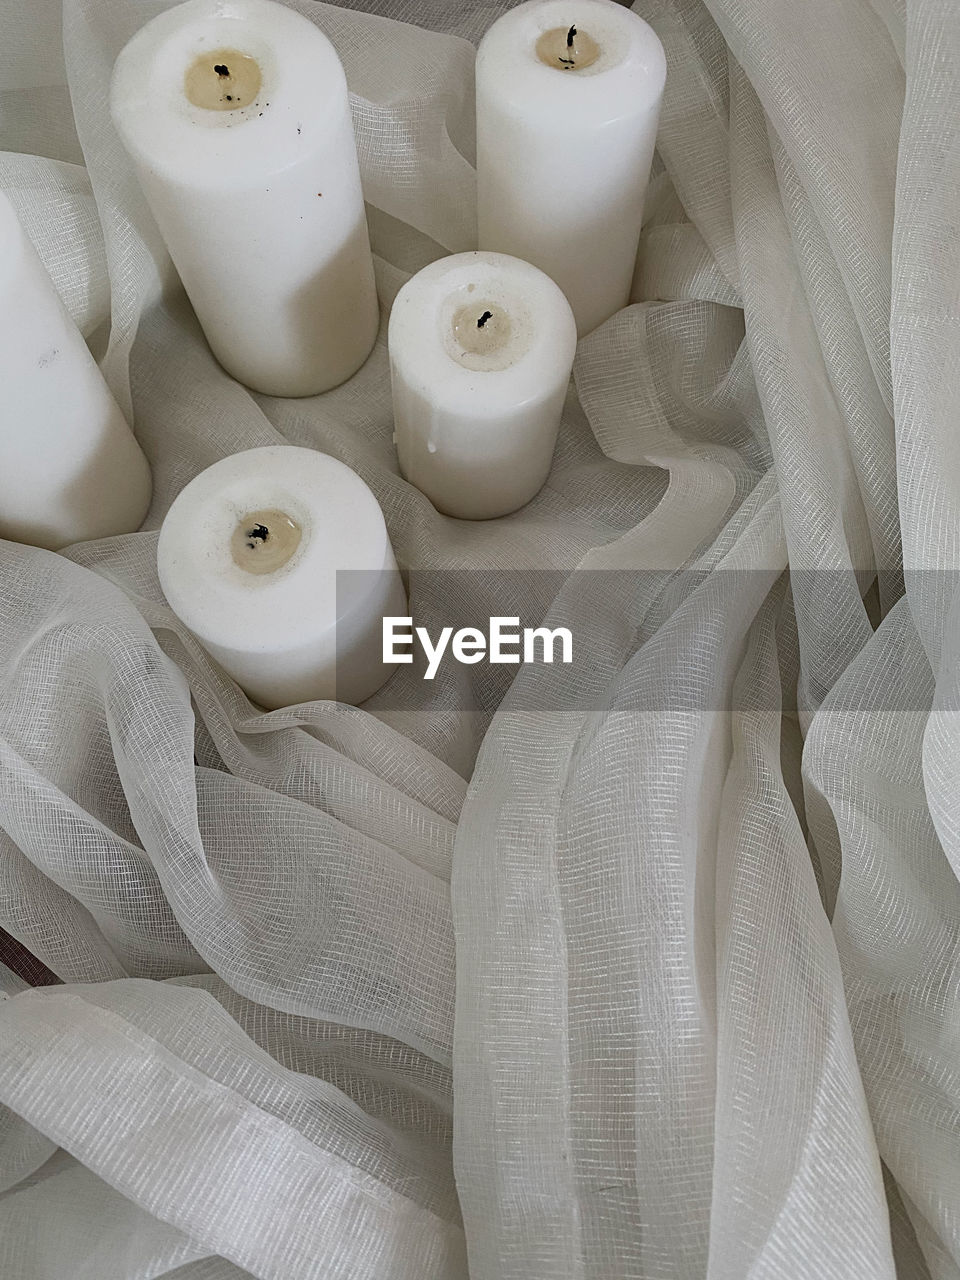 candle, white, indoors, textile, no people, ceramic, high angle view